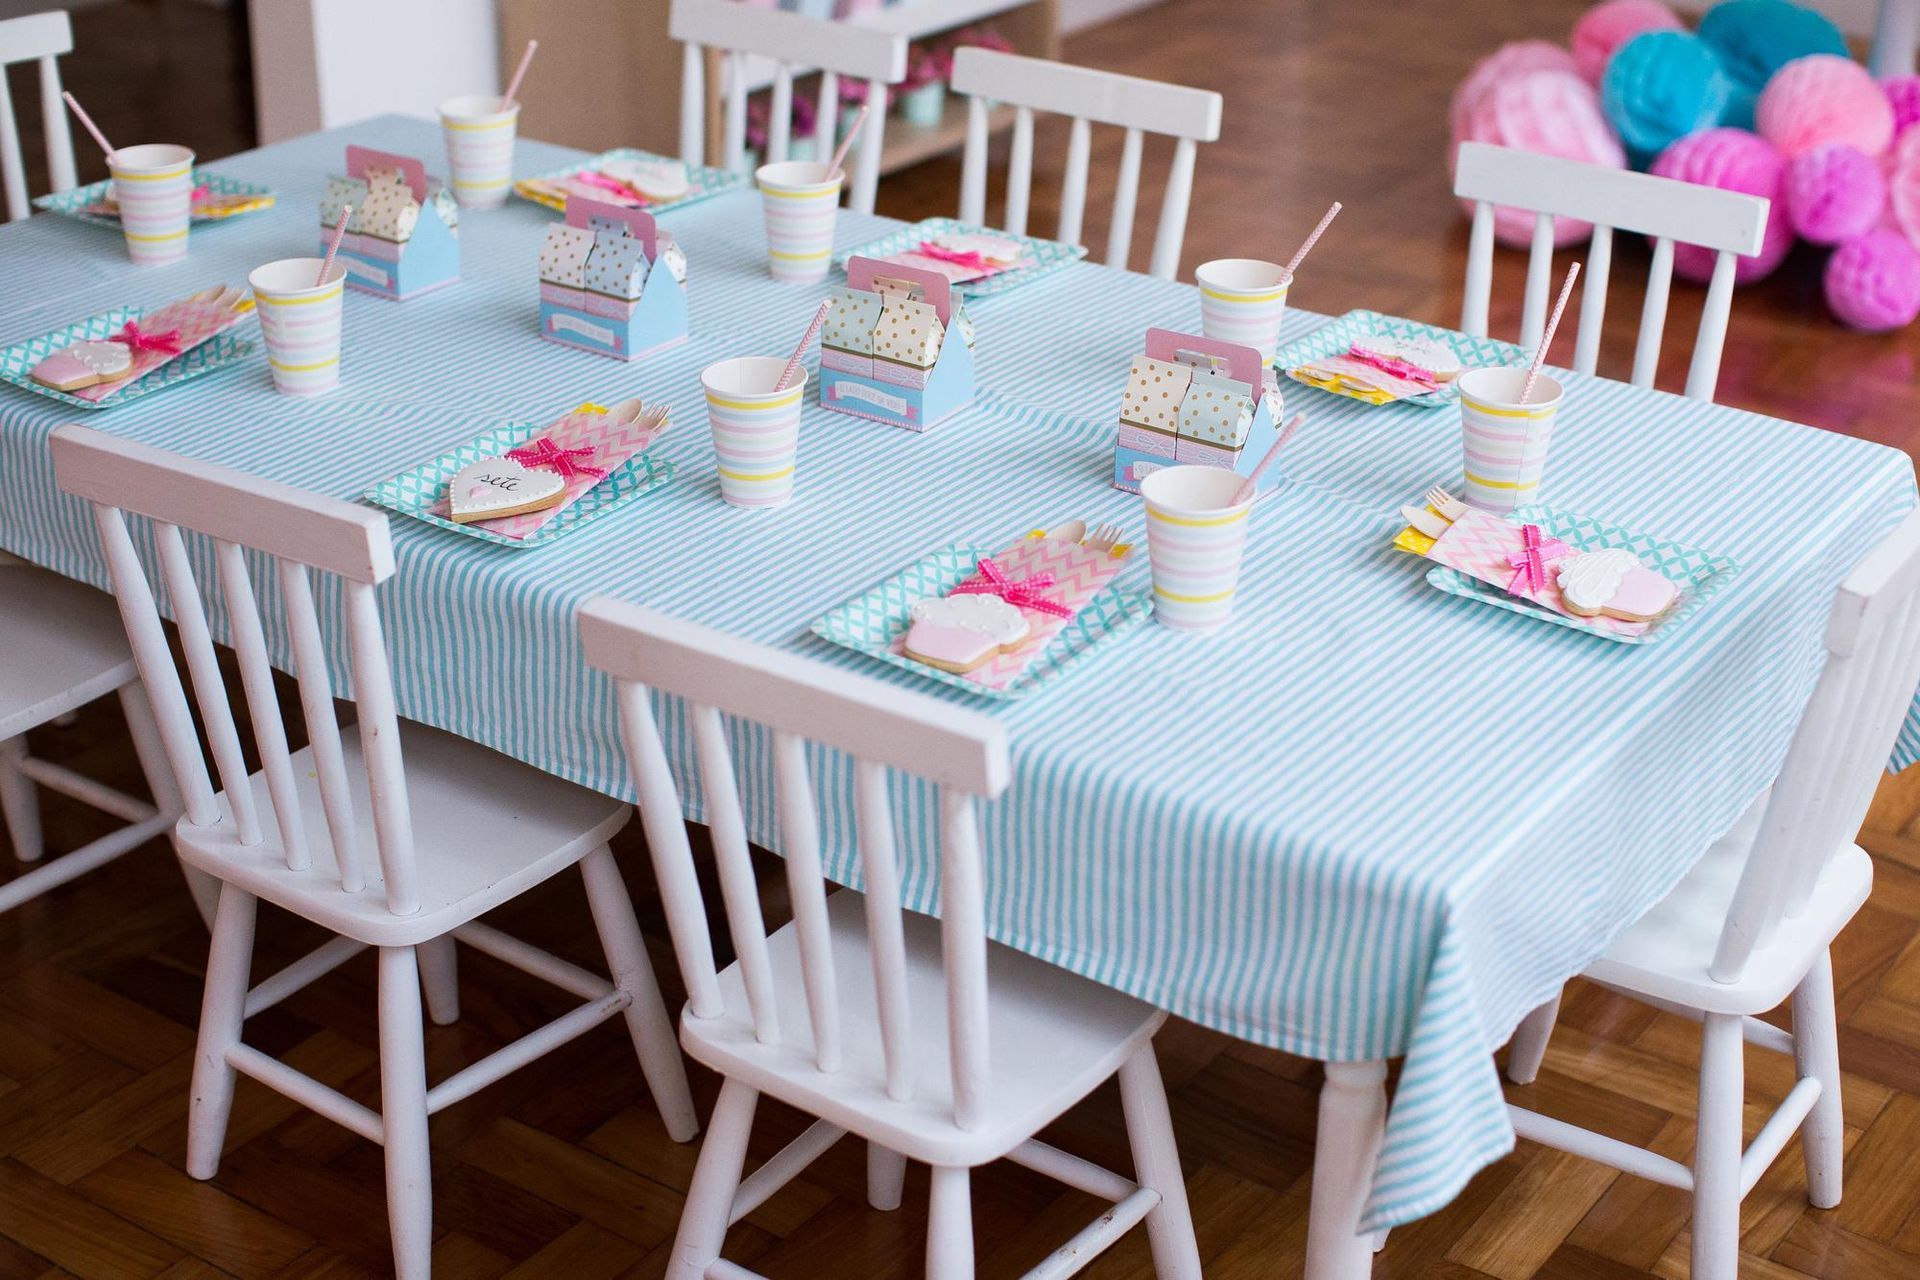 A table set for a birthday party with plates , cups , and napkins.